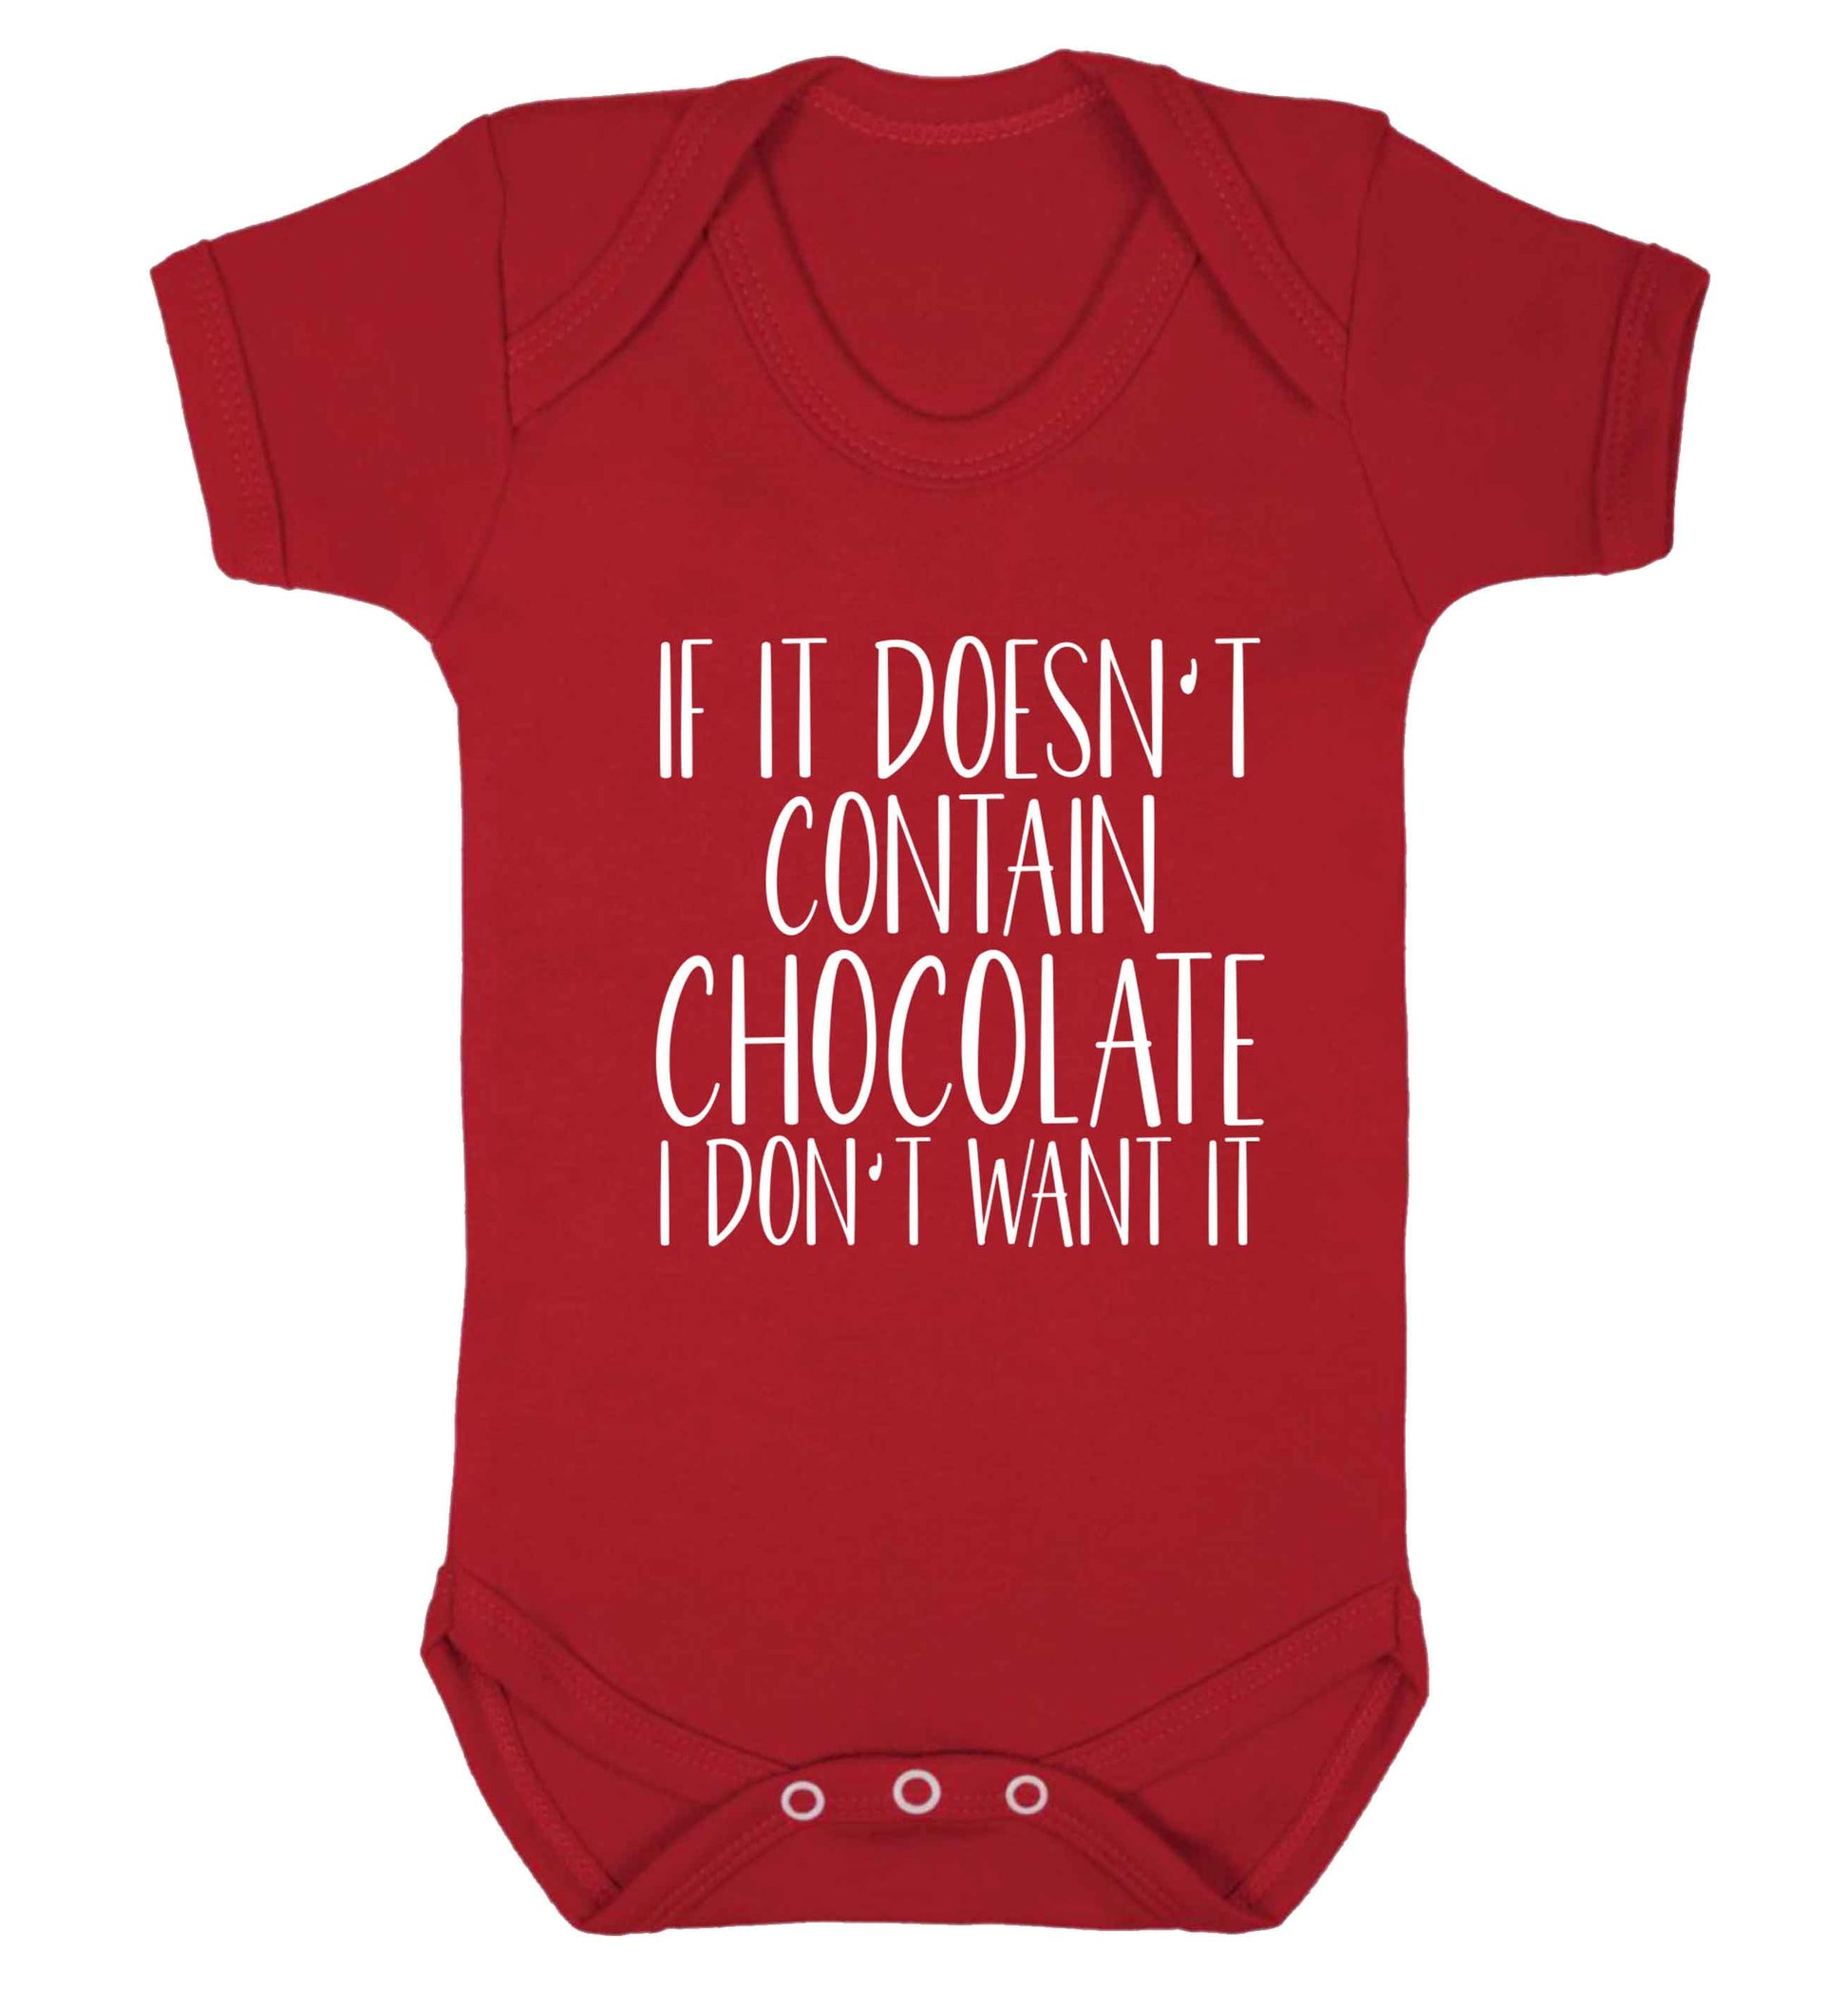 If it doesn't contain chocolate I don't want it baby vest red 18-24 months